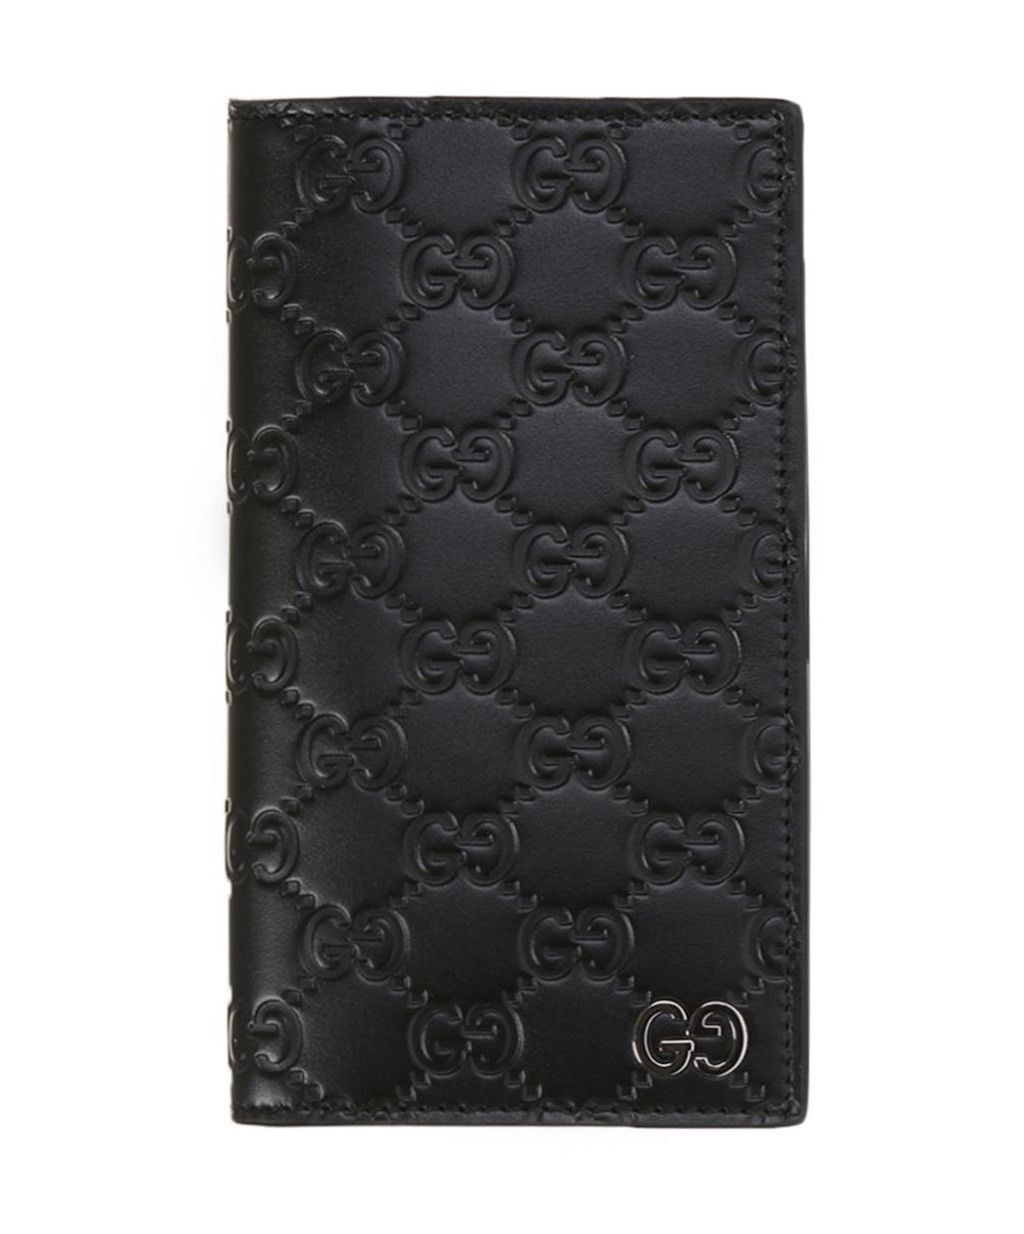 Gucci Gucci Men's Leather Long Wallet 473920 CWC1N 1000